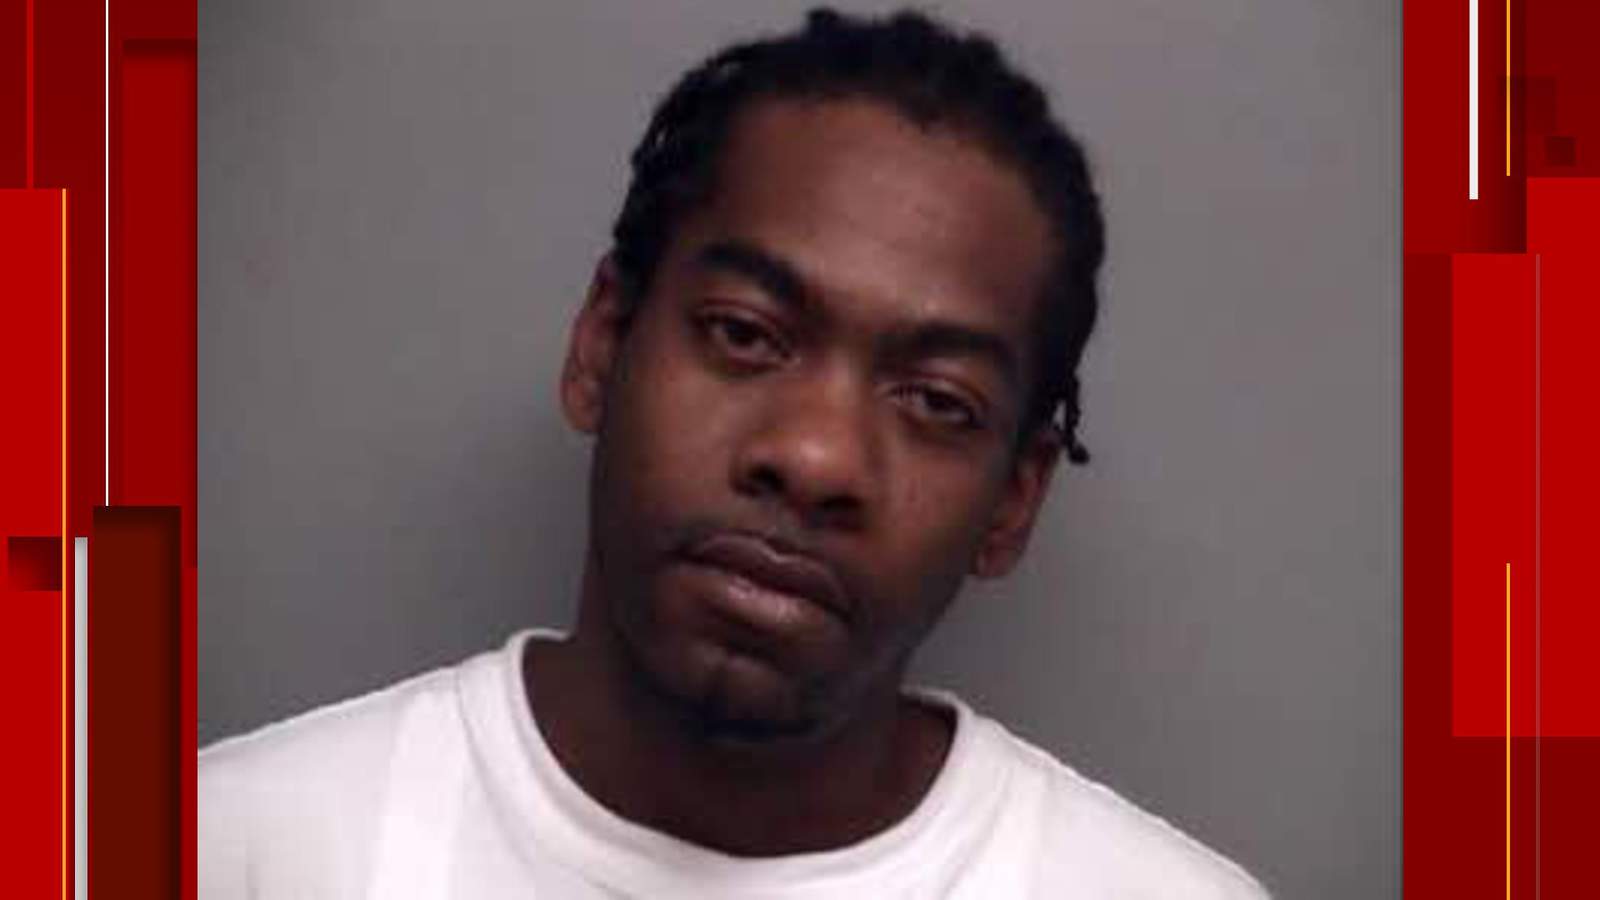 Henry County man wanted, charged with malicious wounding after incident at apartment complex